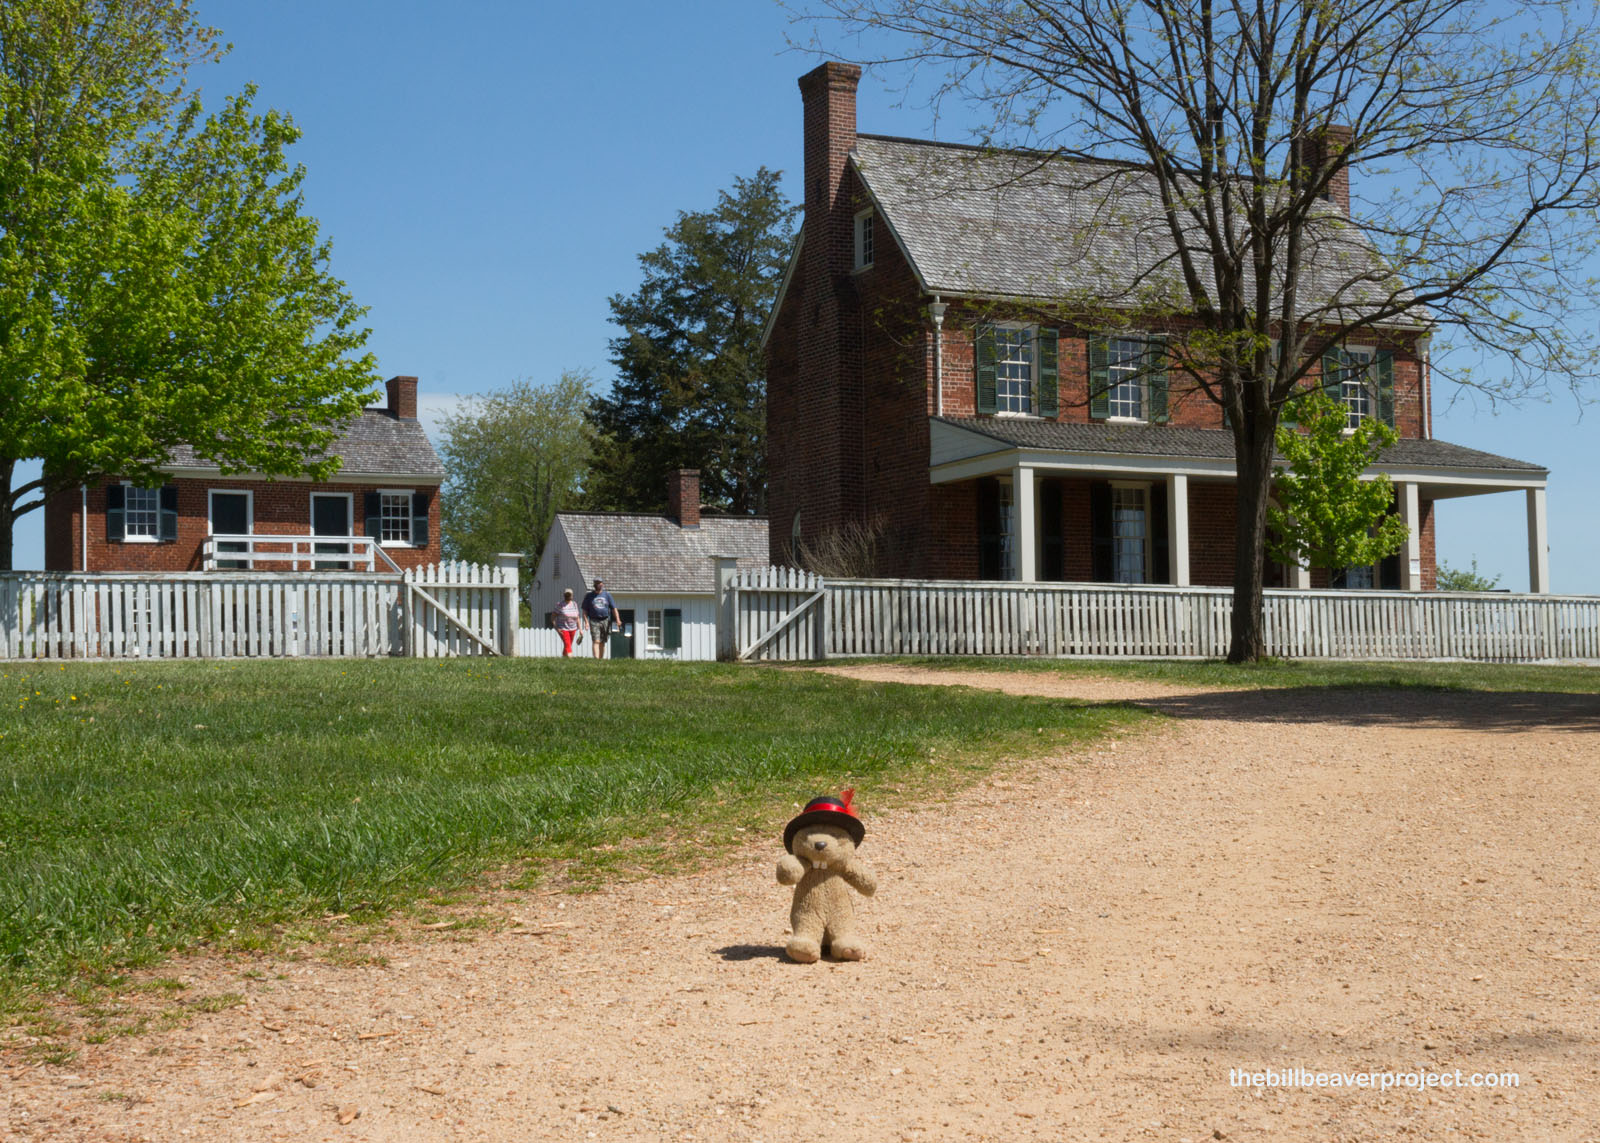 A peek into the old village of Clover Hill!